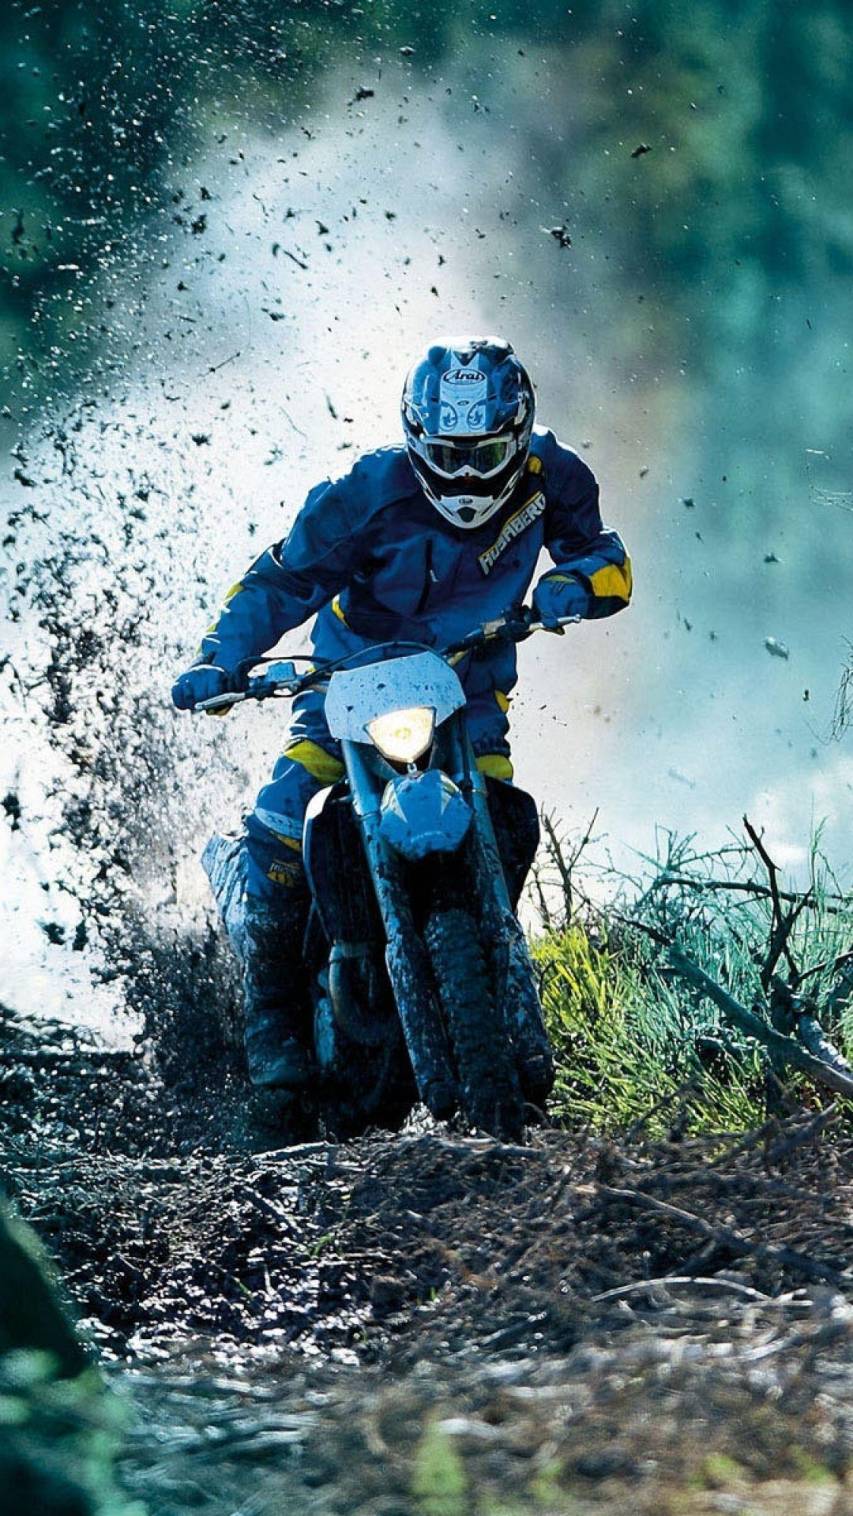 1080x1920 Motocross Background Wallpapers